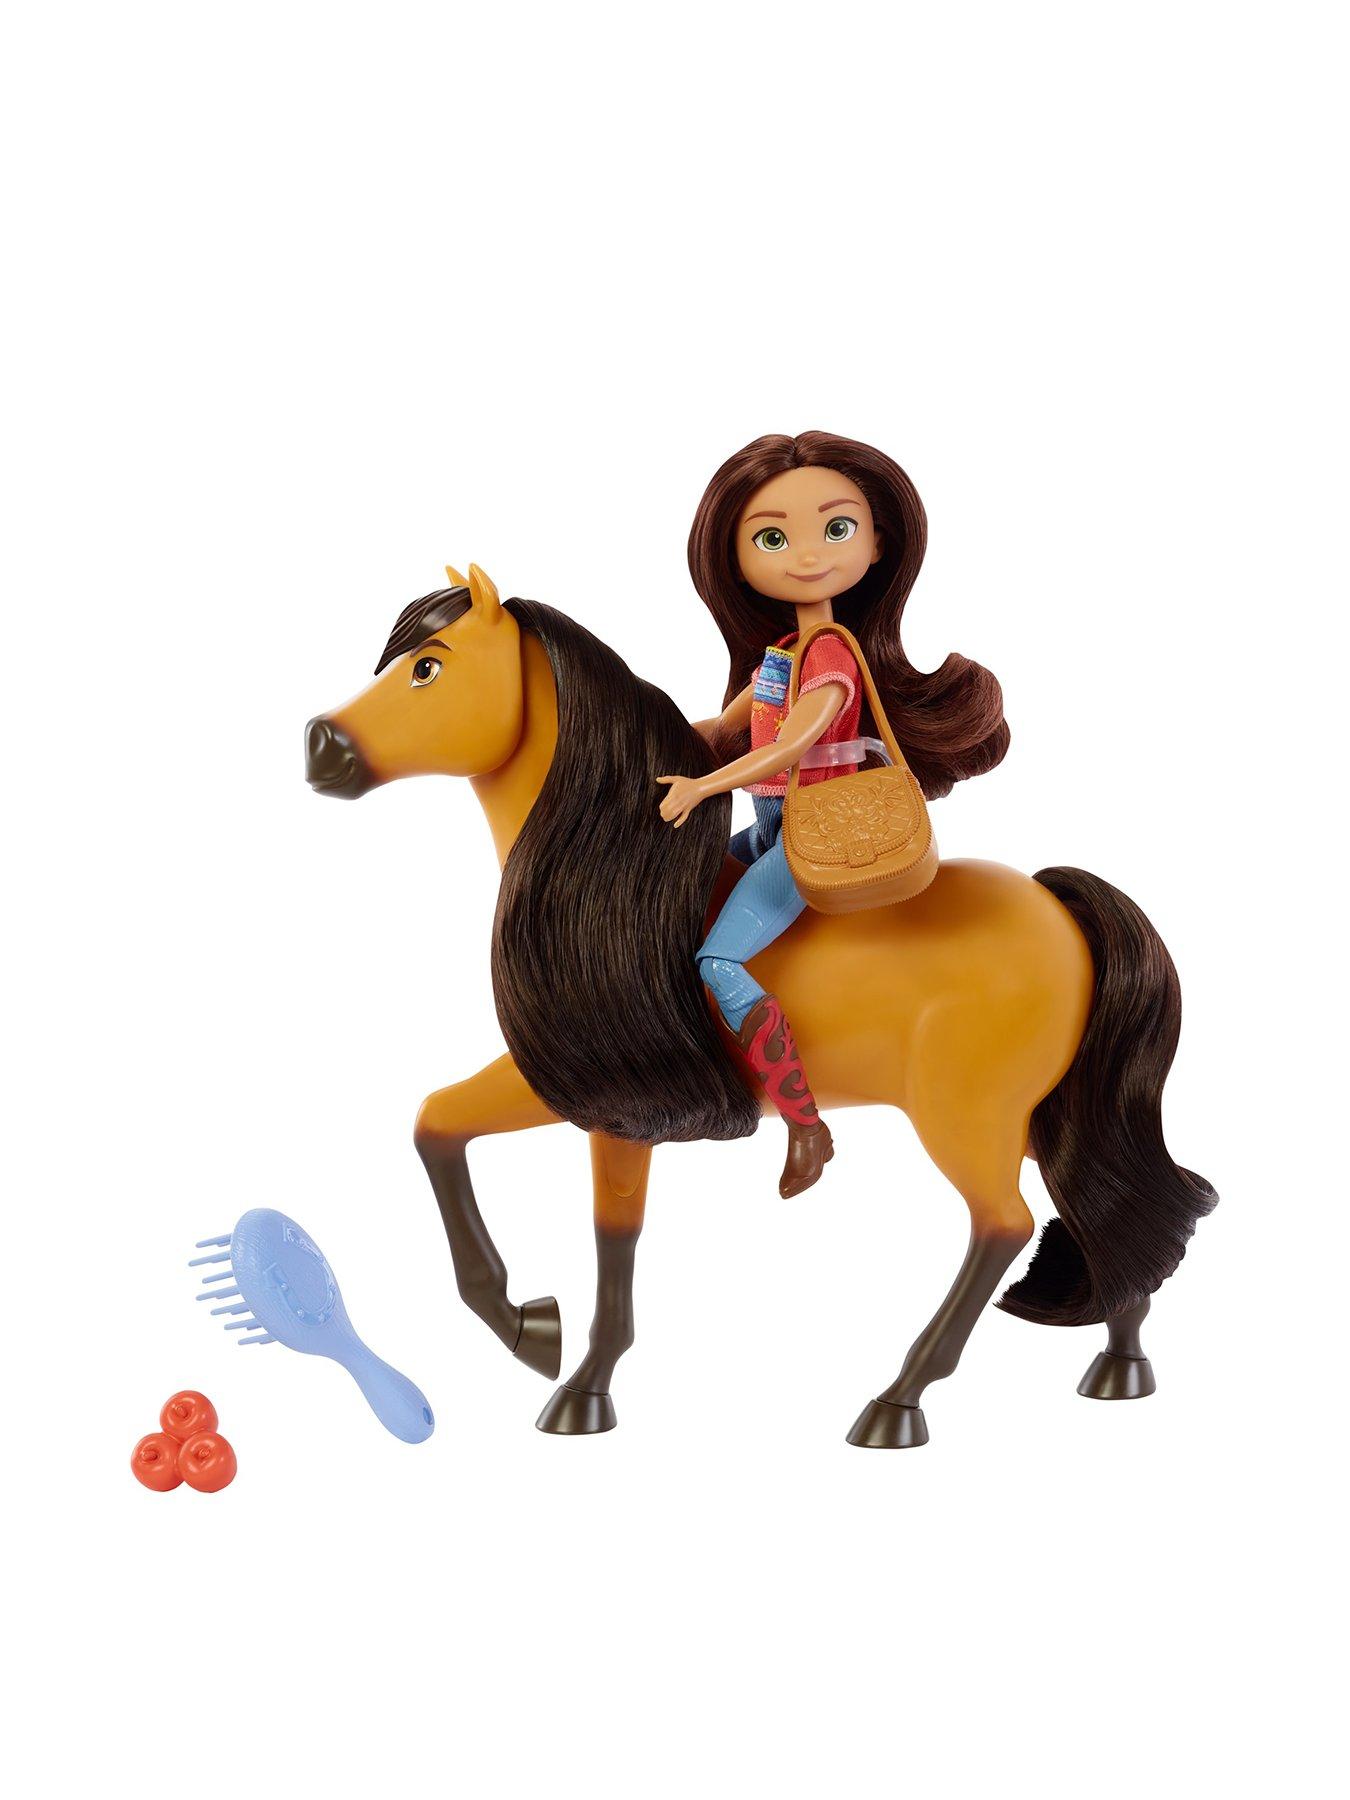 Approx. 4-in 5 Movable Joints & Story Accessories: Rocking Horse Small Horse & More Mattel Spirit Untamed Young Lucky Doll Great Gift for Ages 3 Years Old & Up 